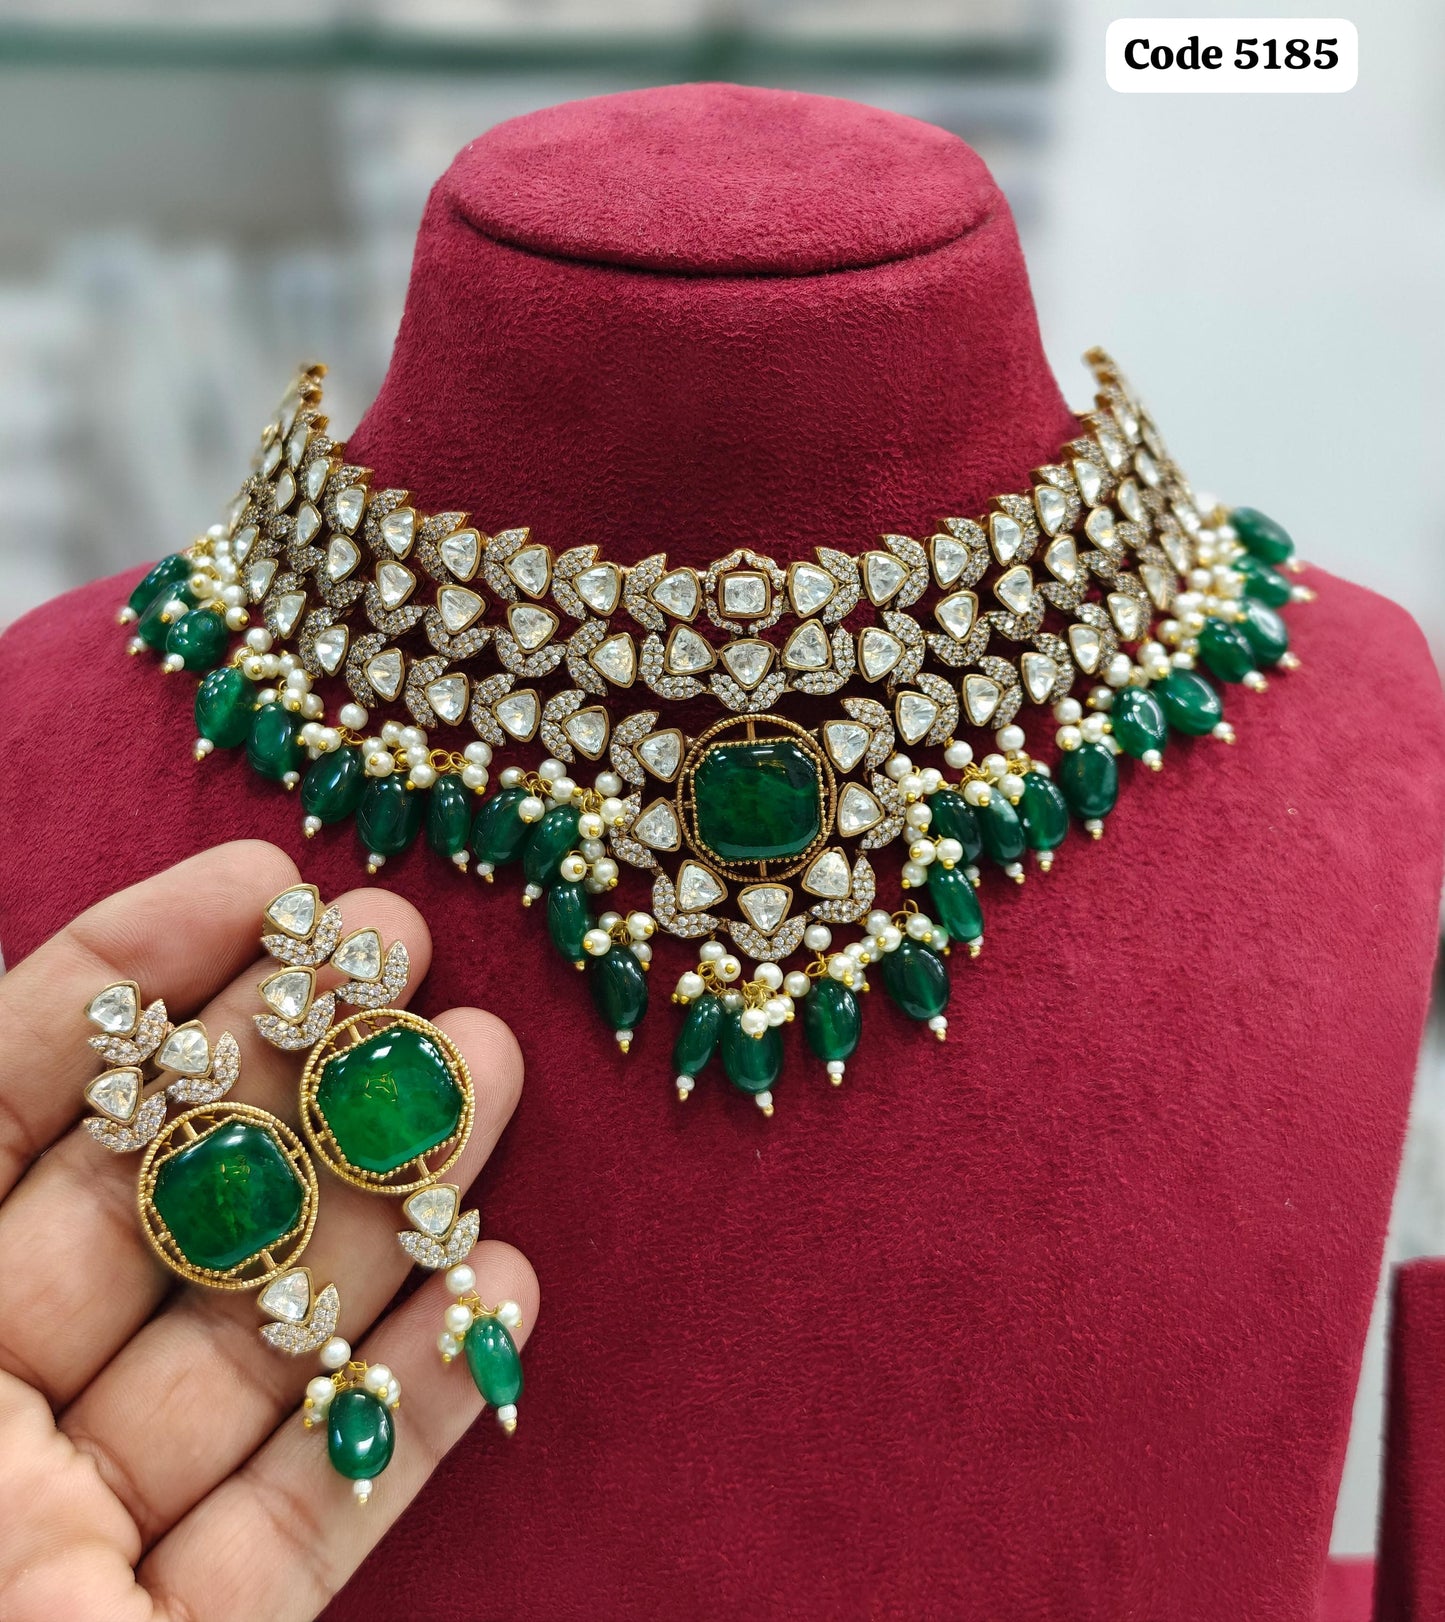 Glorious Heritage High Quality Uncut Polki Kundan Necklace with Big Ad Stone and Green Pearl Earrings jewellery set , Indian Jewellery set , Bollywood jewellery